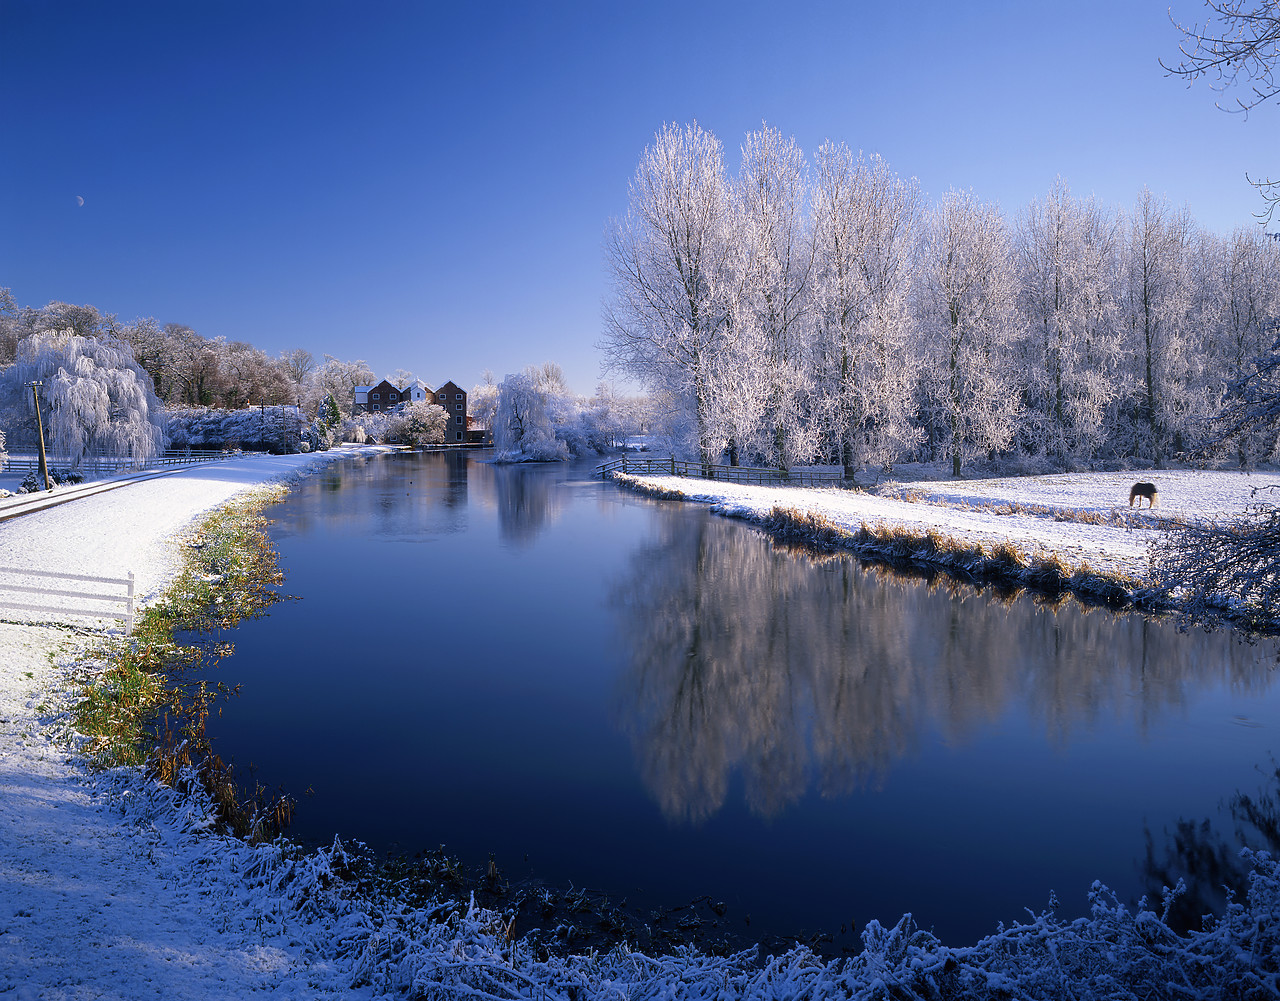 #955888-3 - Oxnead Mill in Frost, River Bure, Norfolk, England